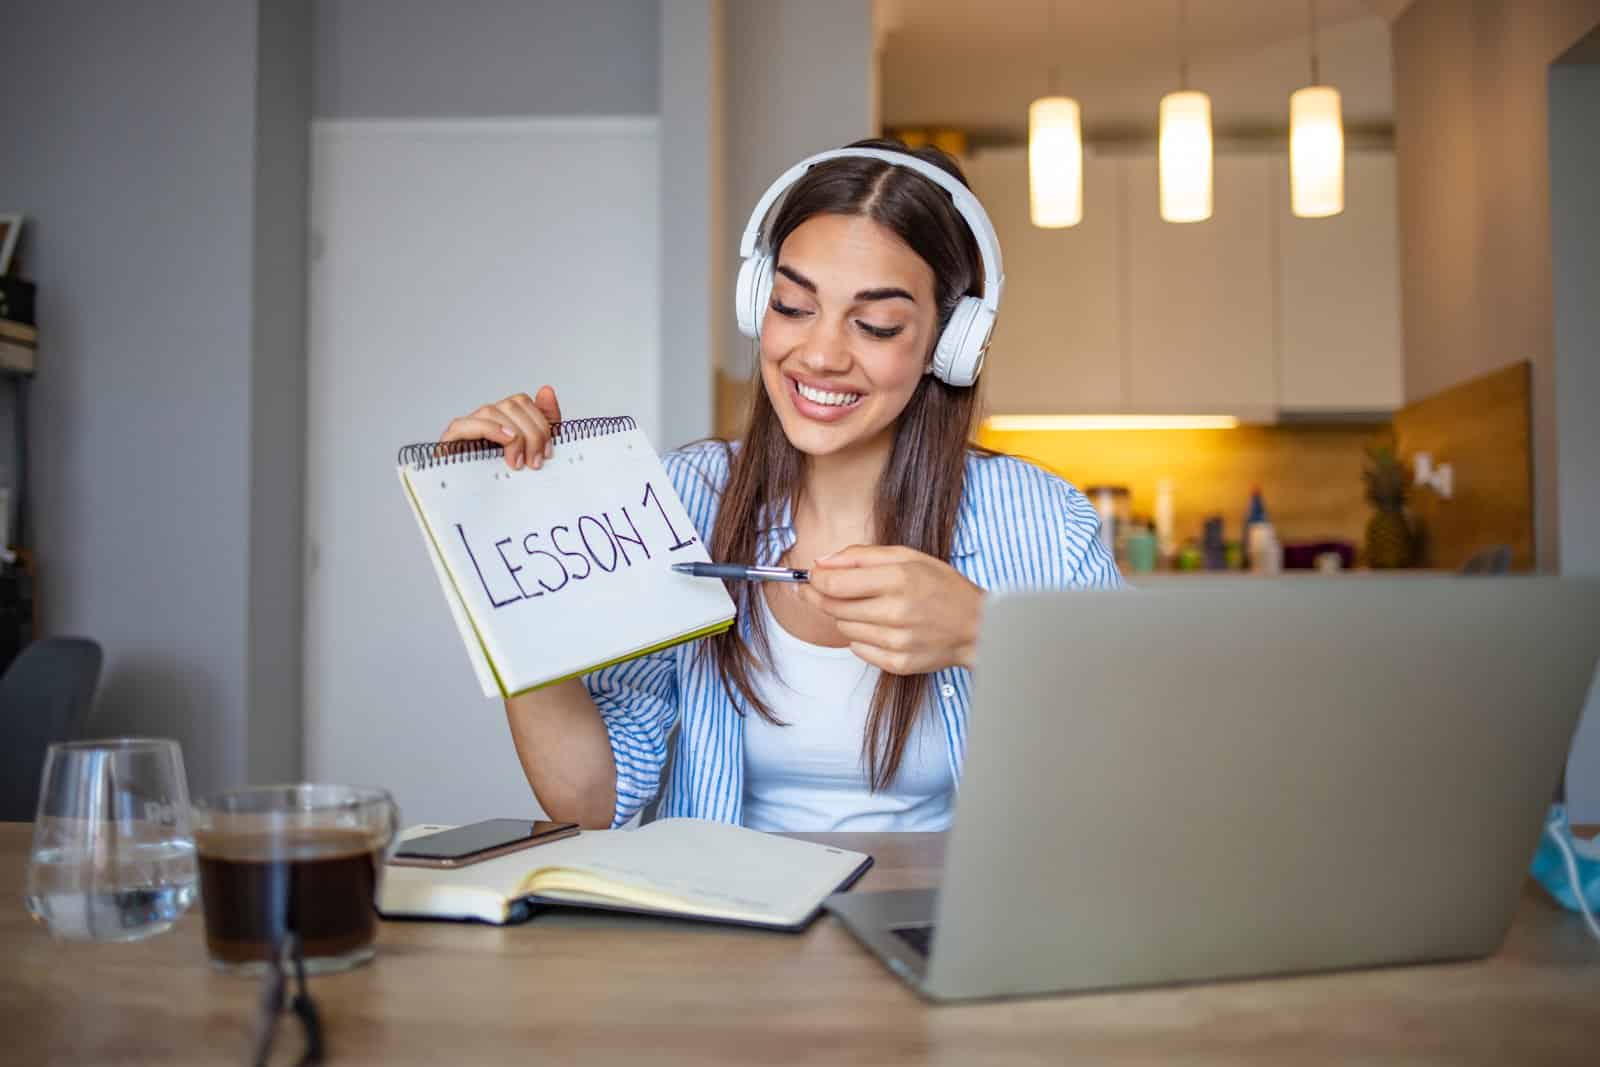 <p class="wp-caption-text">Image Credit: Shutterstock / Dragana Gordic</p>  <p>Teach a language from anywhere in the world to students globally. This job requires proficiency in the language taught and the ability to engage students virtually. It offers flexible hours and the opportunity to connect with people from different cultures.</p>